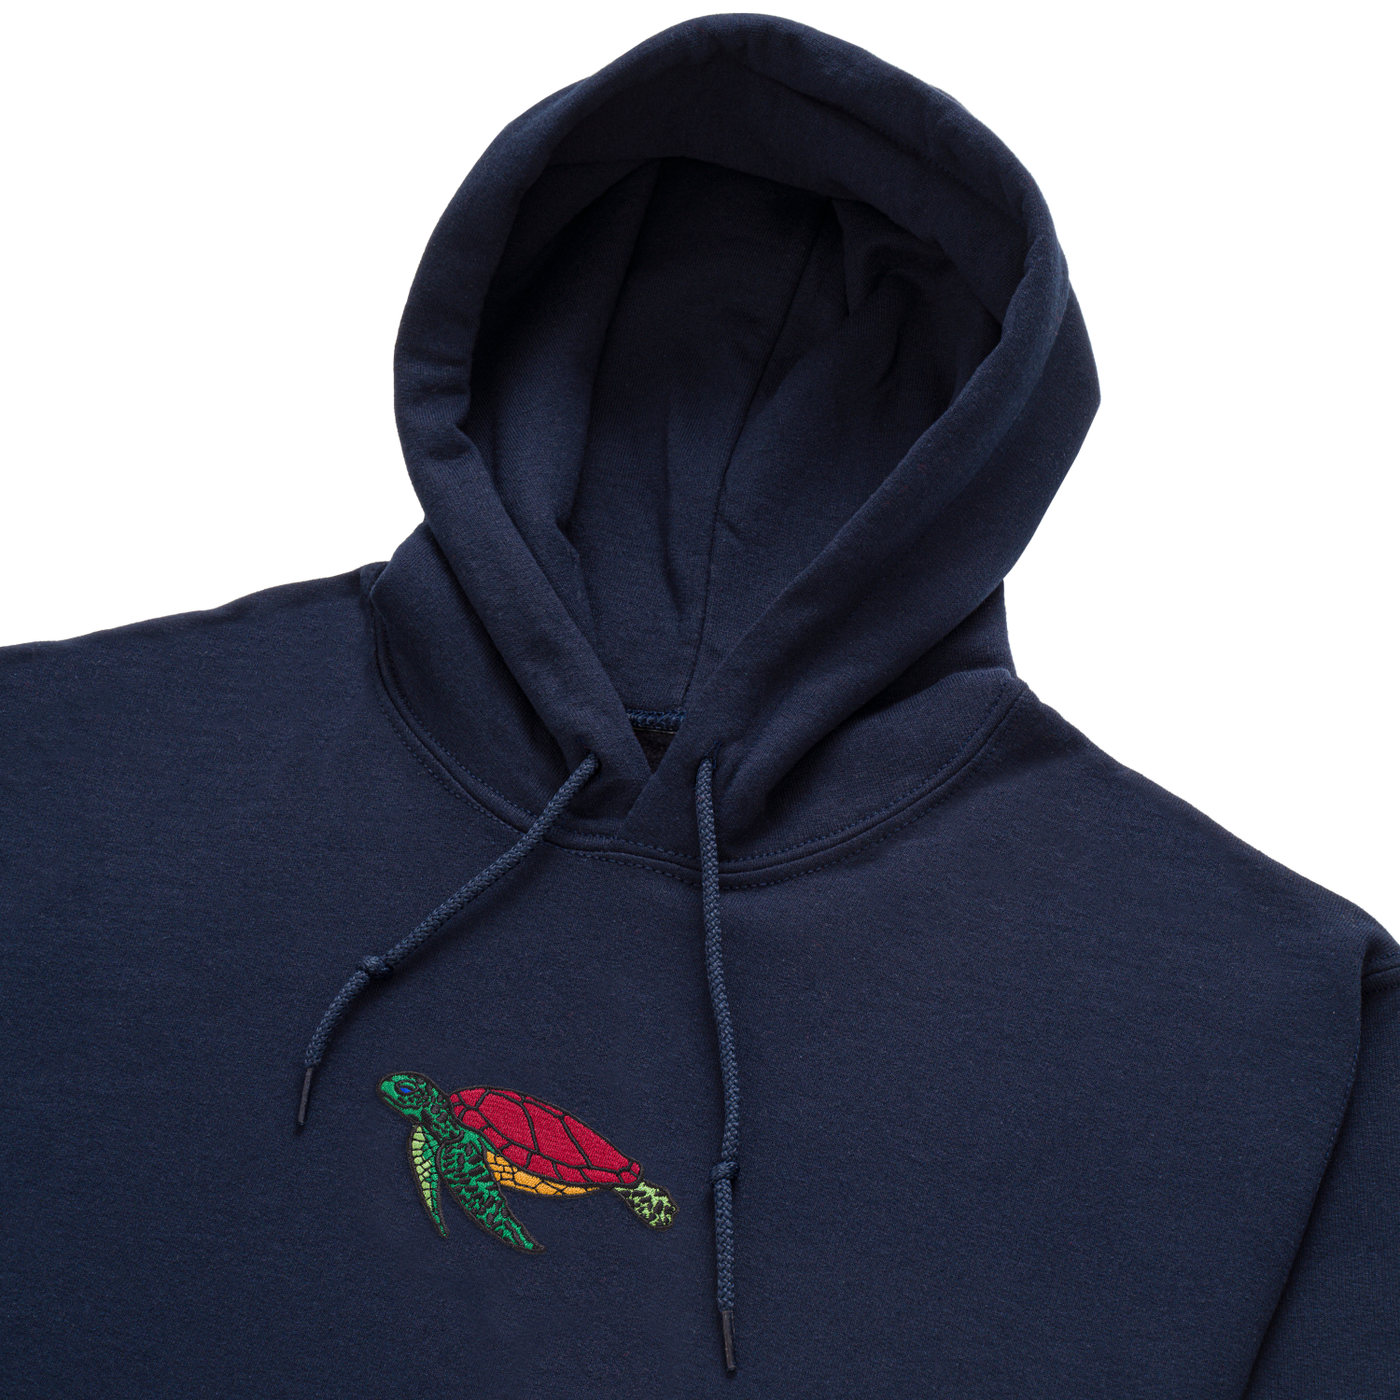 Bobby's Planet Women's Embroidered Sea Turtle Hoodie from Seven Seas Fish Animals Collection in Navy Color#color_navy